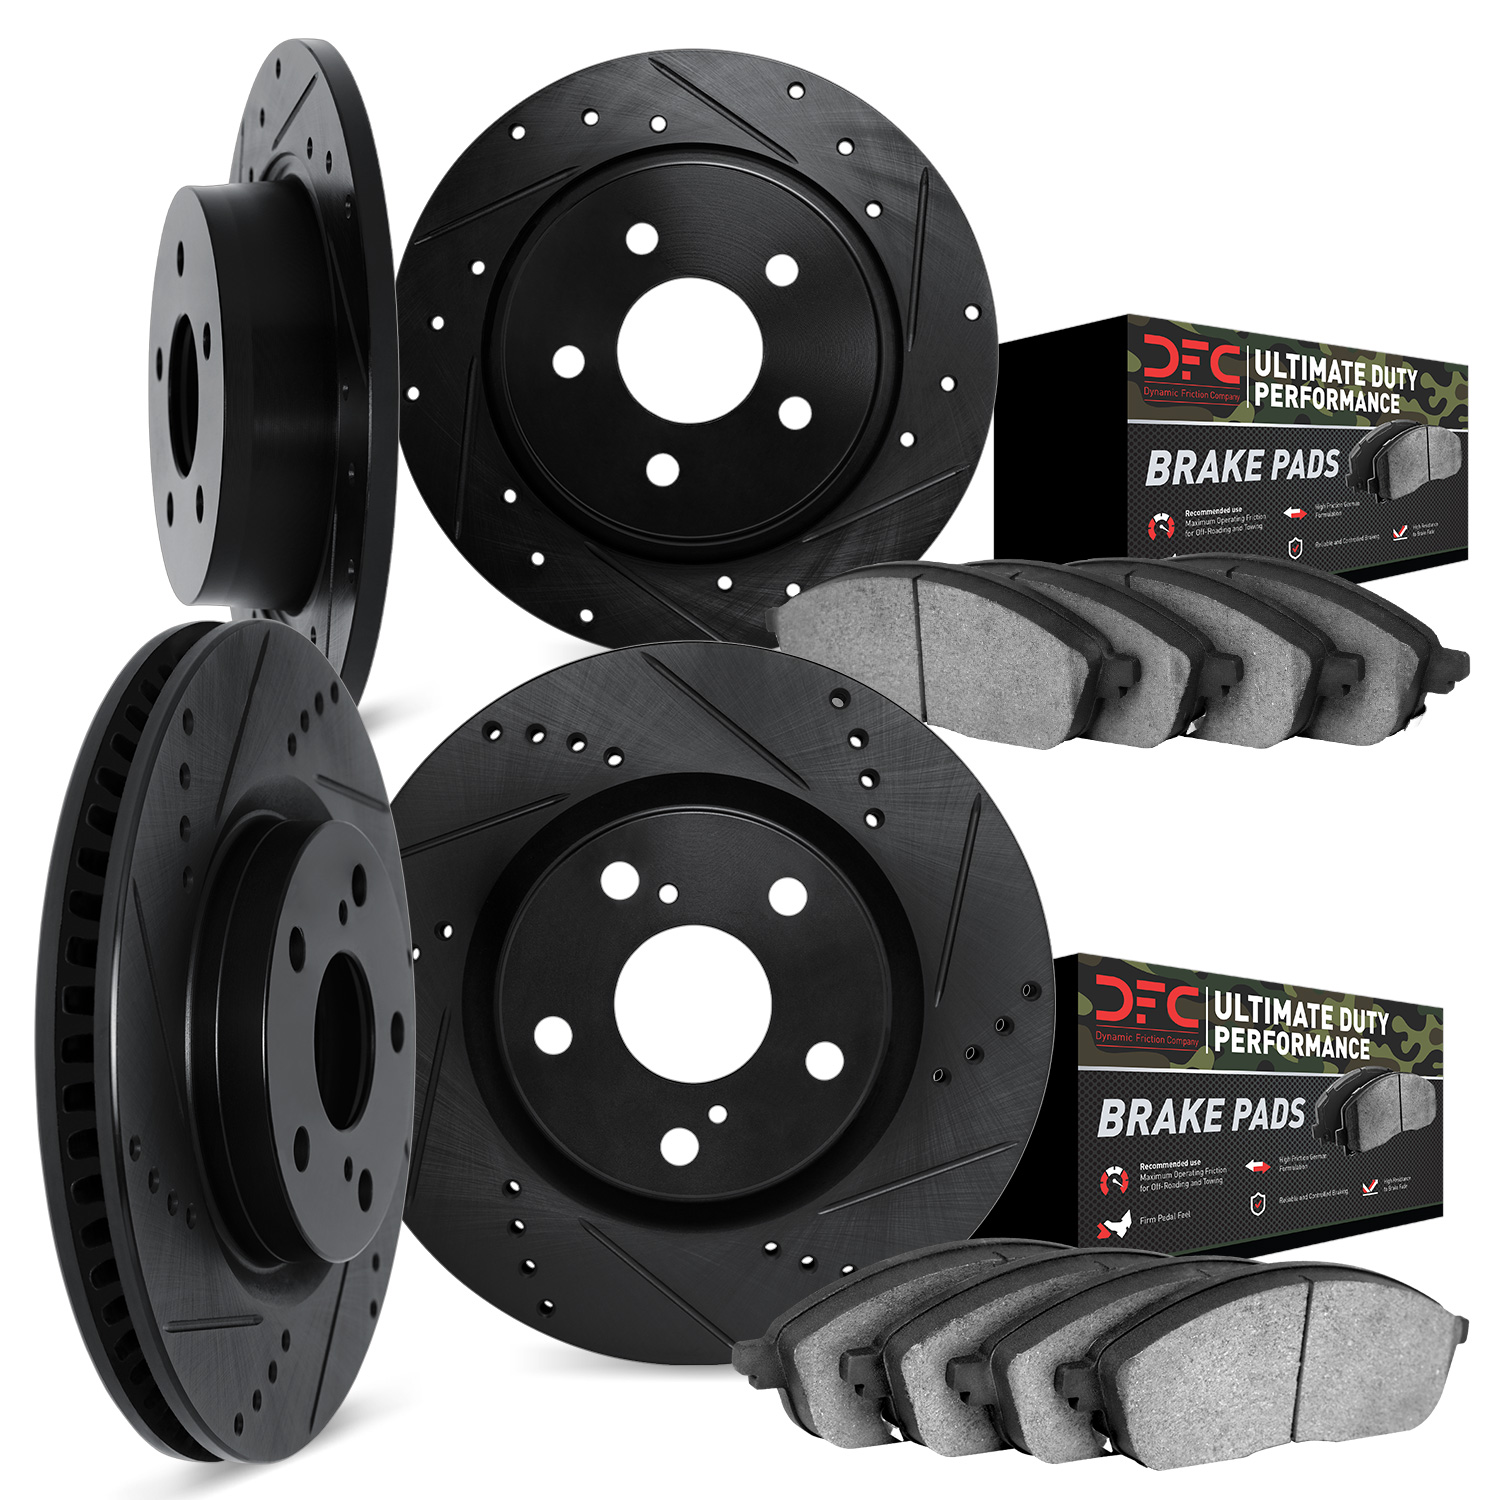 8404-42017 Drilled/Slotted Brake Rotors with Ultimate-Duty Brake Pads Kit [Black], 2012-2018 Mopar, Position: Front and Rear